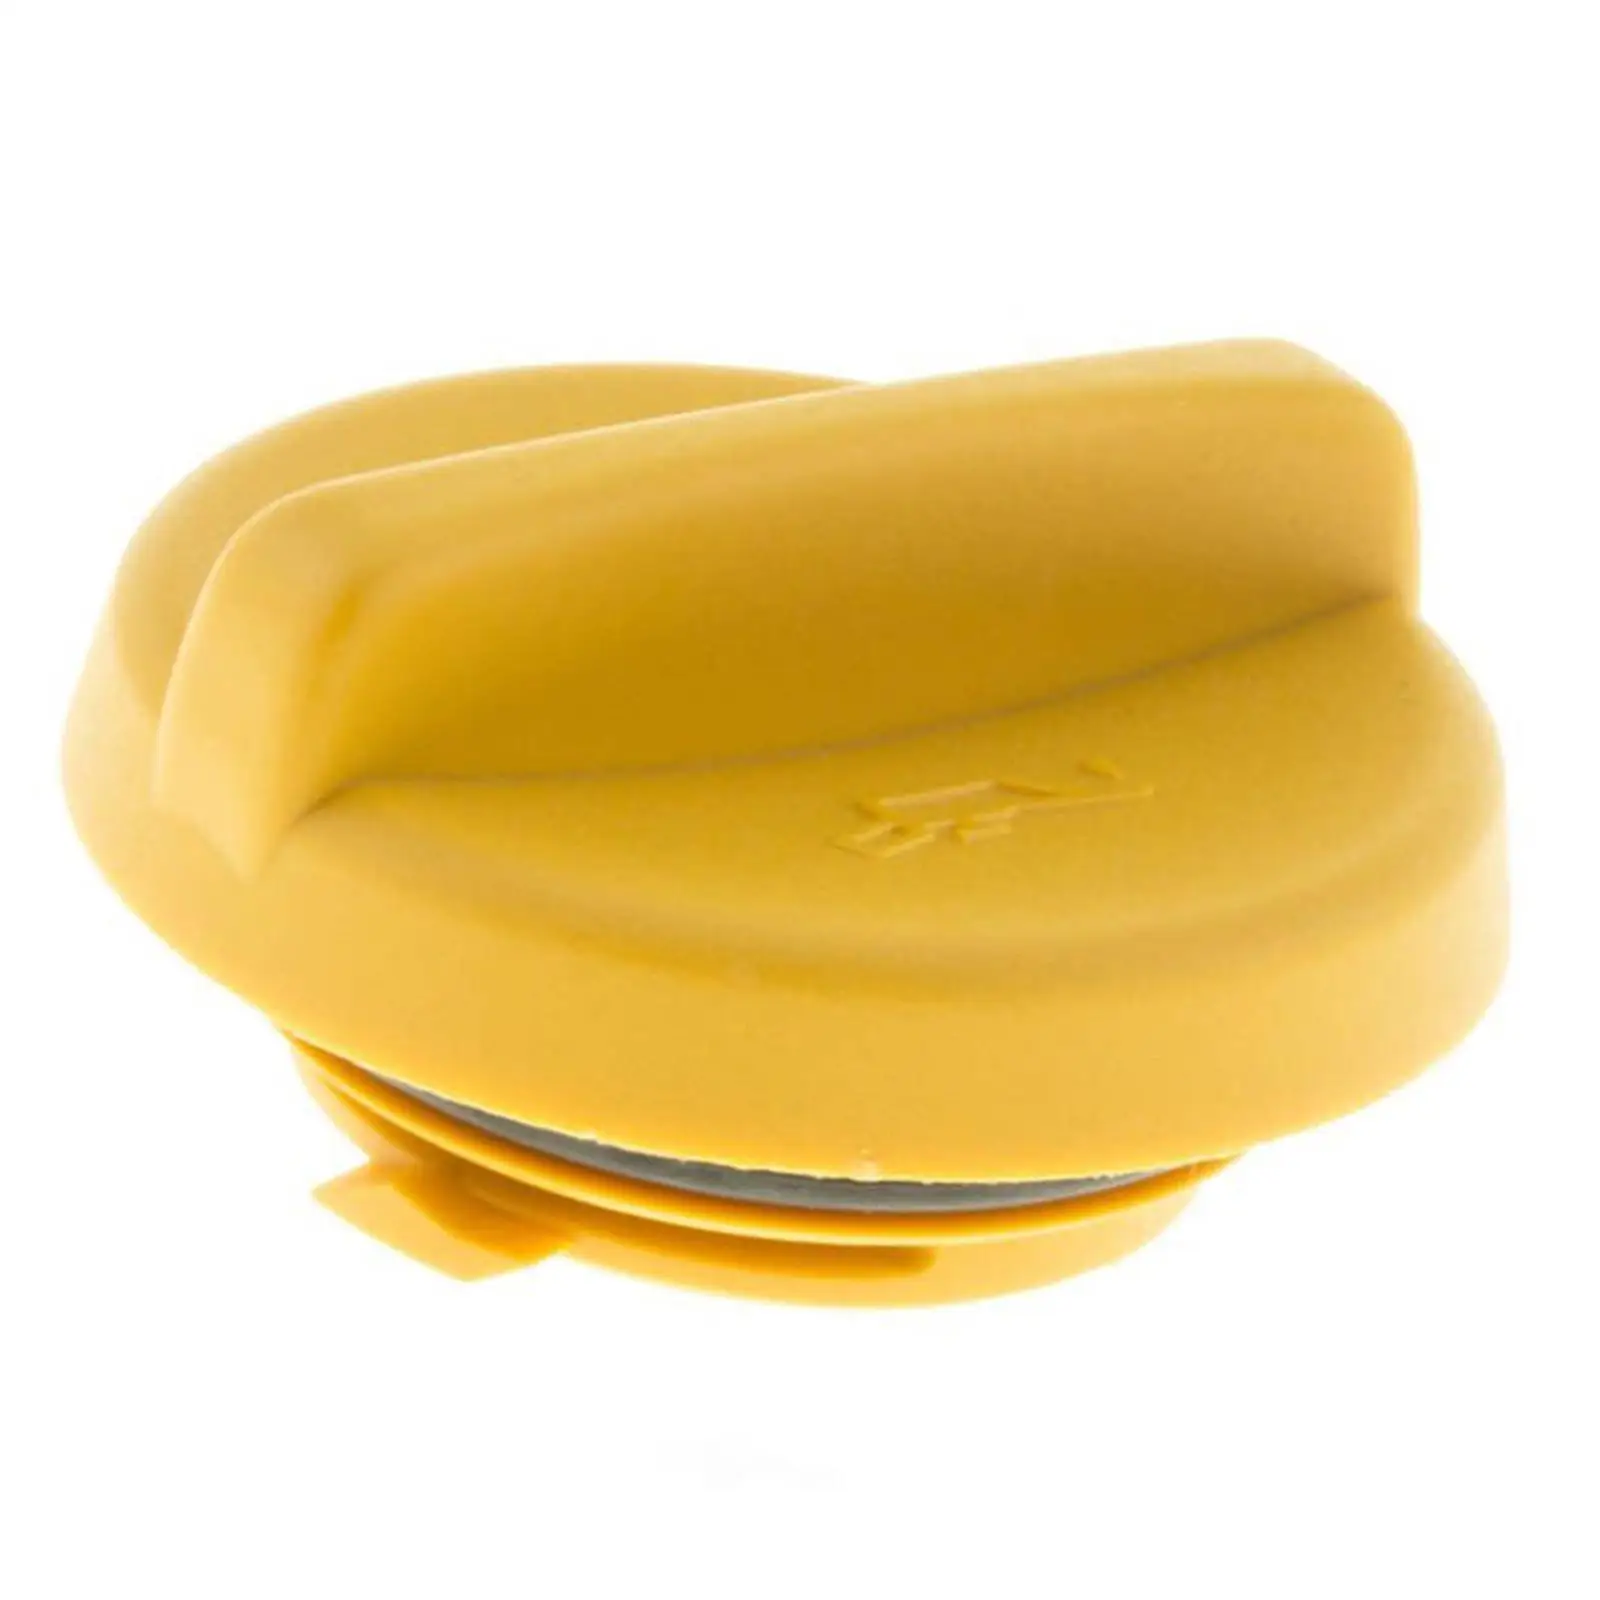 Engine Oil Filler Cap 90412508 90412509 650090 5650831 Replaces Vehicle Repair Parts Yellow for ASTRA Vauxhall Meriva Corsa